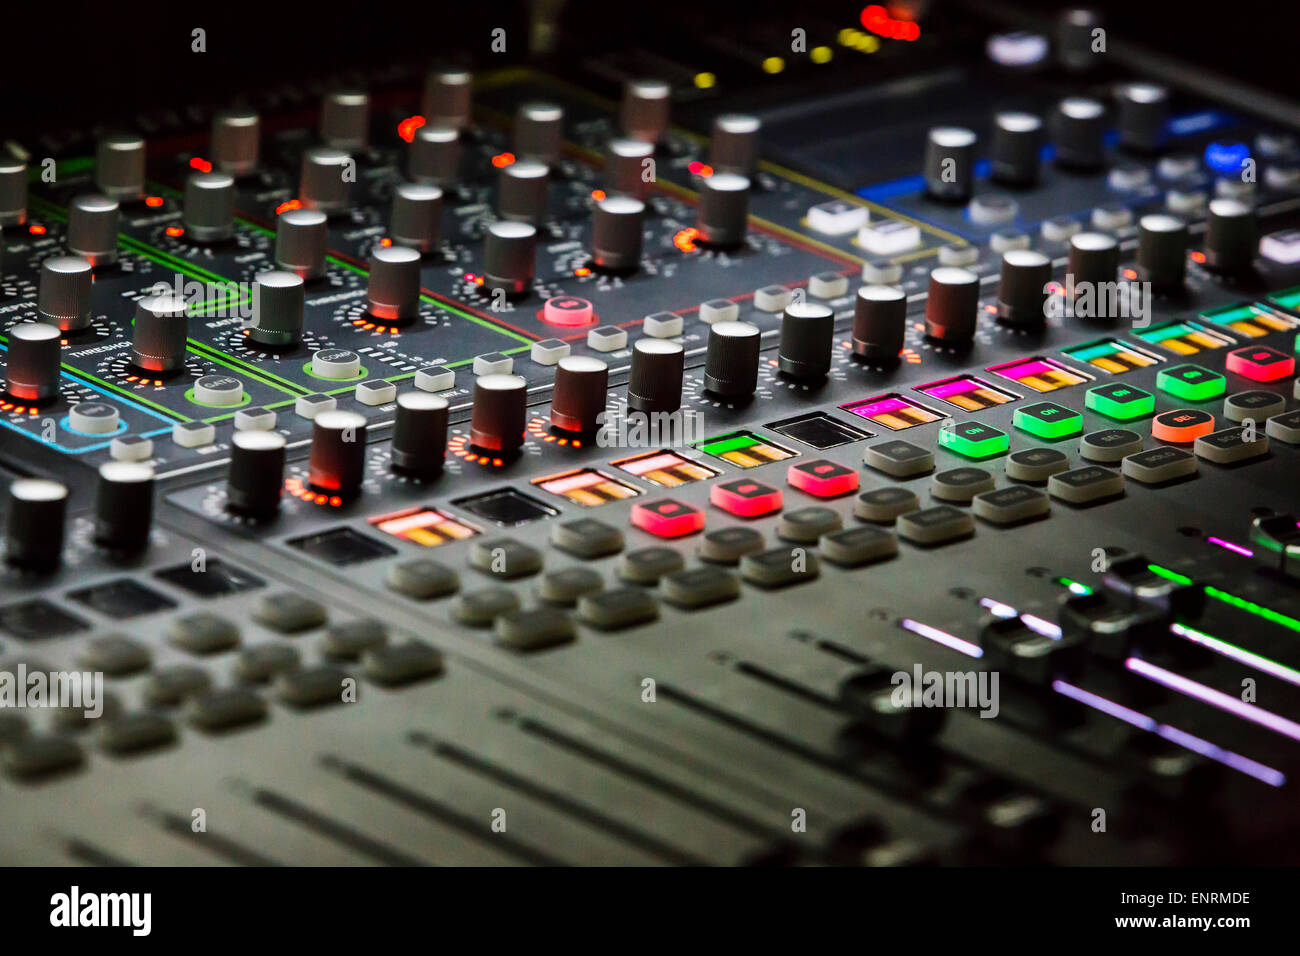 Audio mixer mixing board fader and knobs with selective focus on central  buttons, Music mixing console with backlit buttons Stock Photo - Alamy